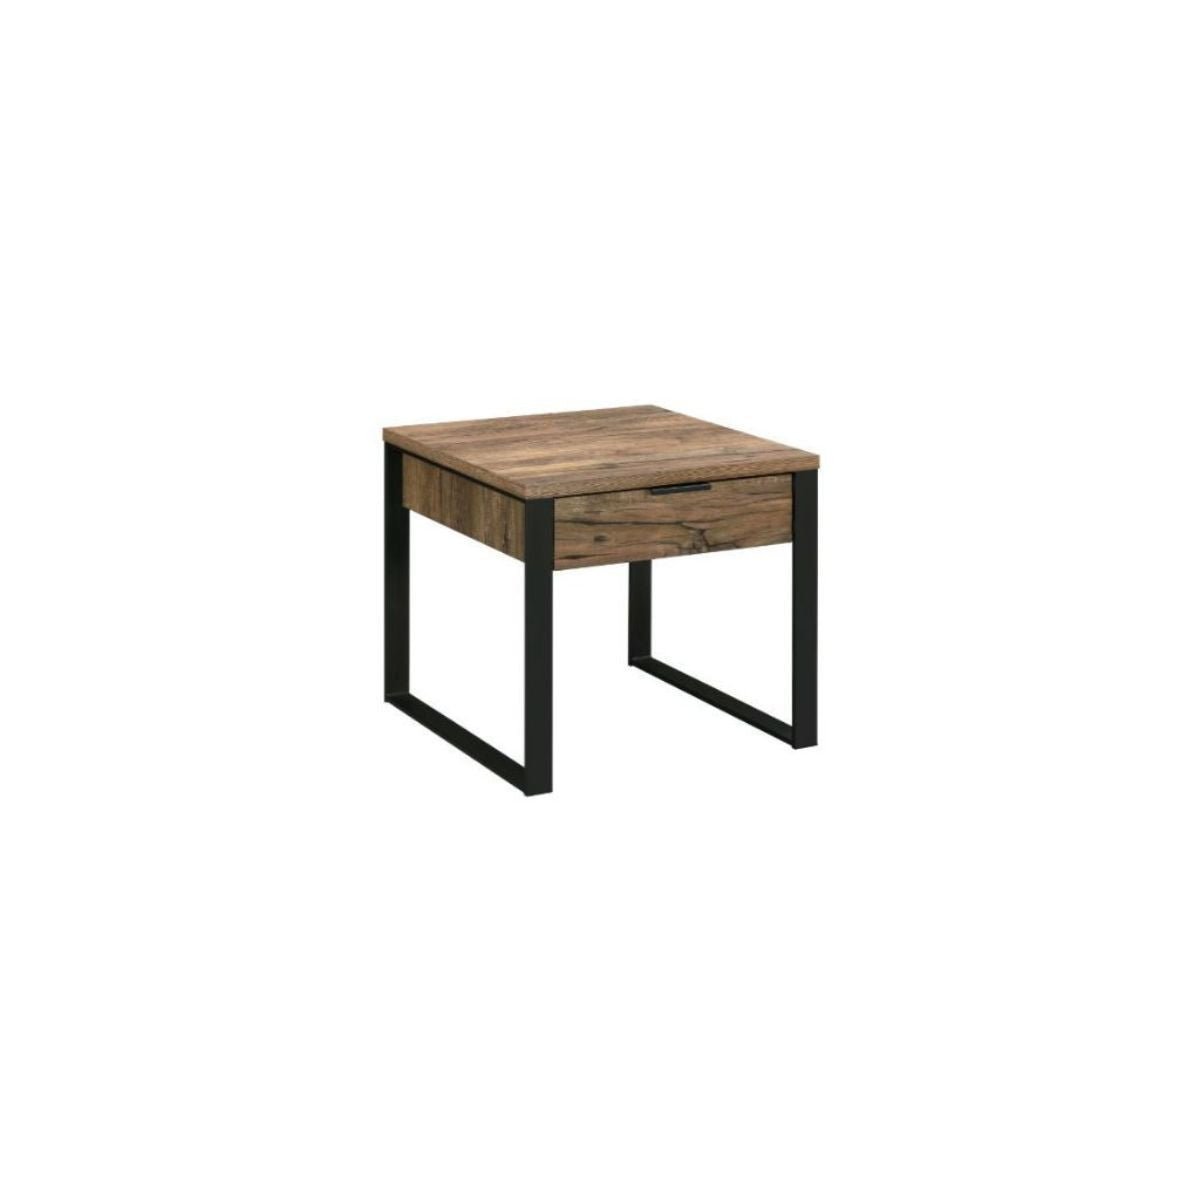 22" Black And Weathered Oak Square End Table With Drawer